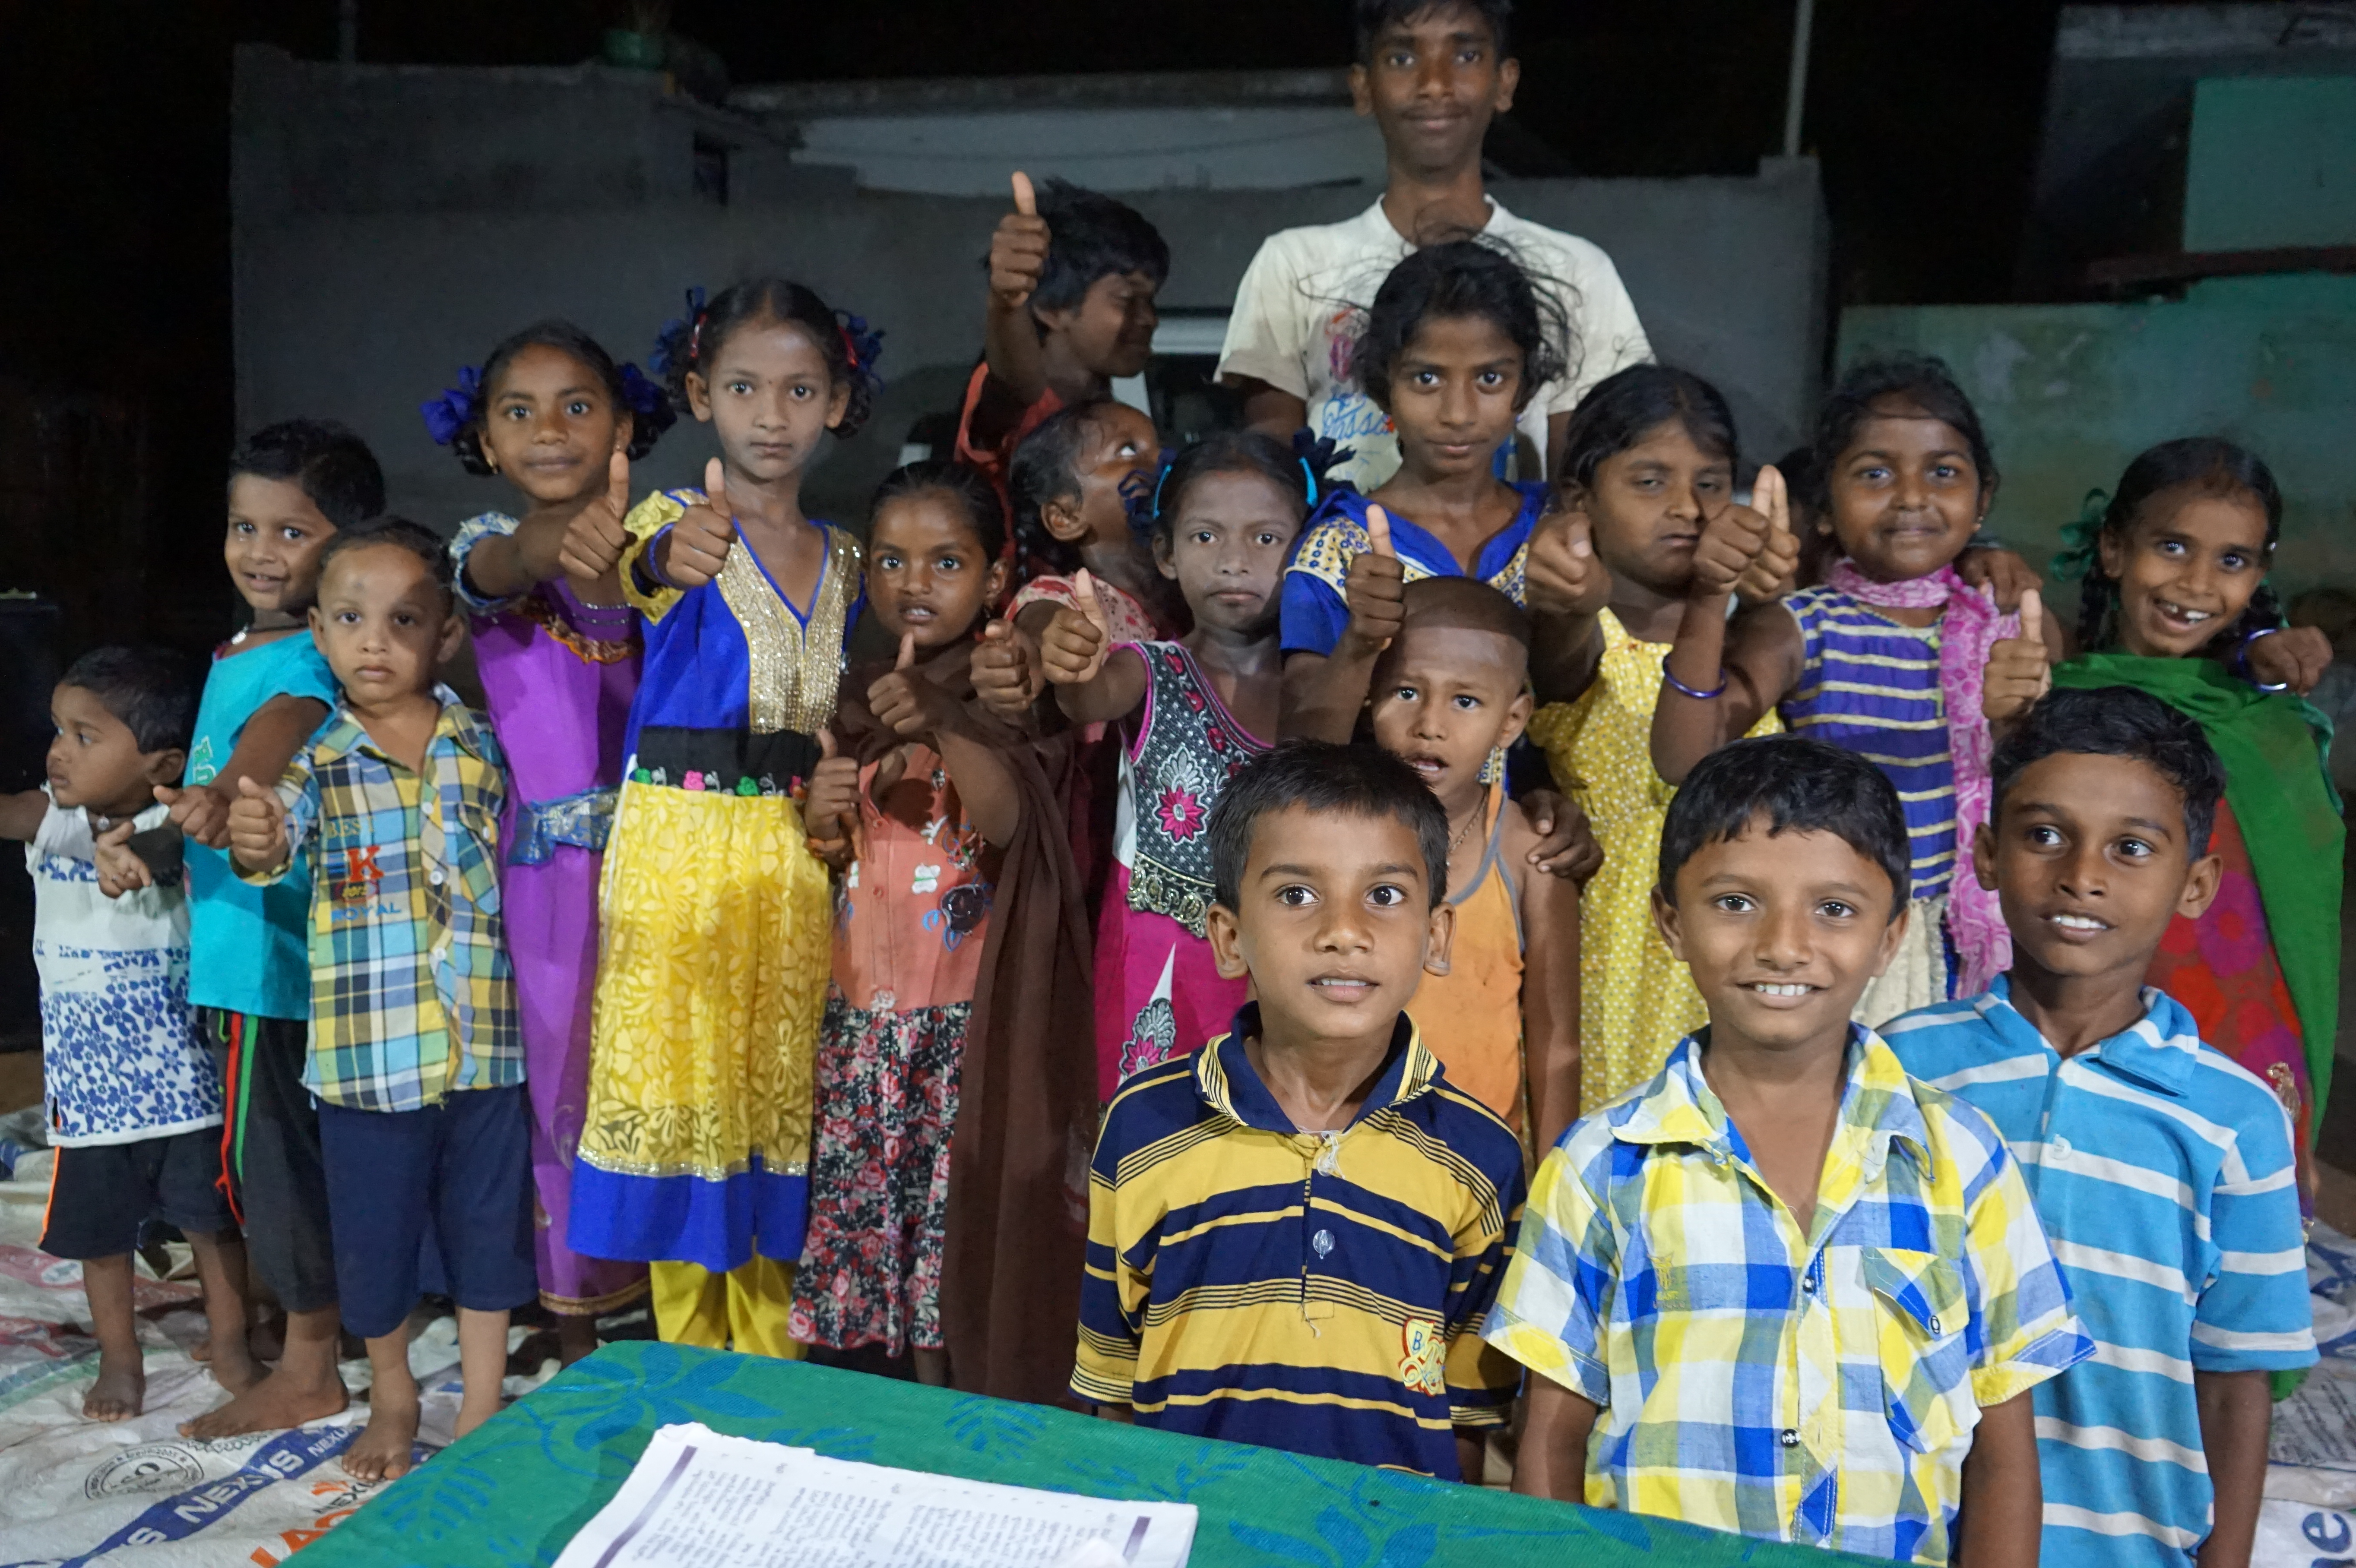 Taking the Gospel To Those Who Have Not Heard – Puttagunta, India